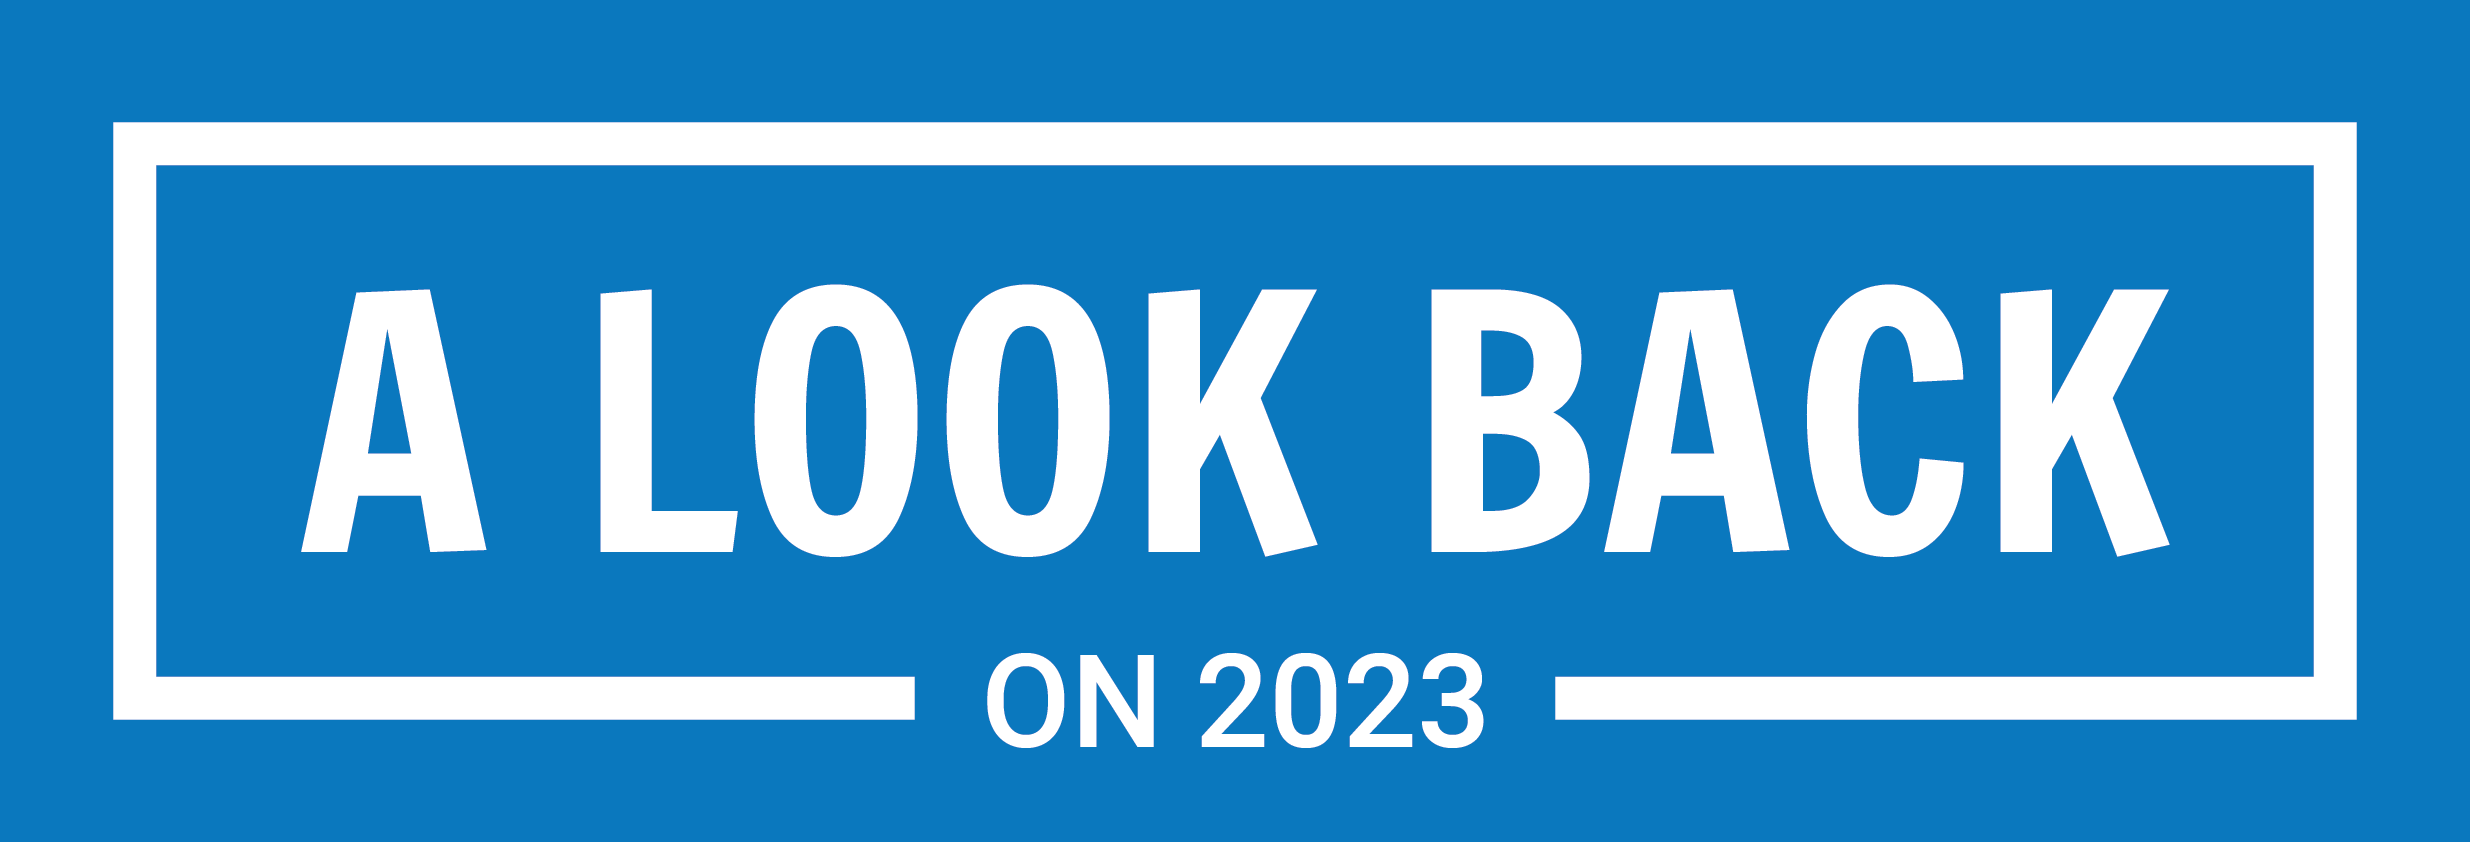 Graphic for a look back on 2023.